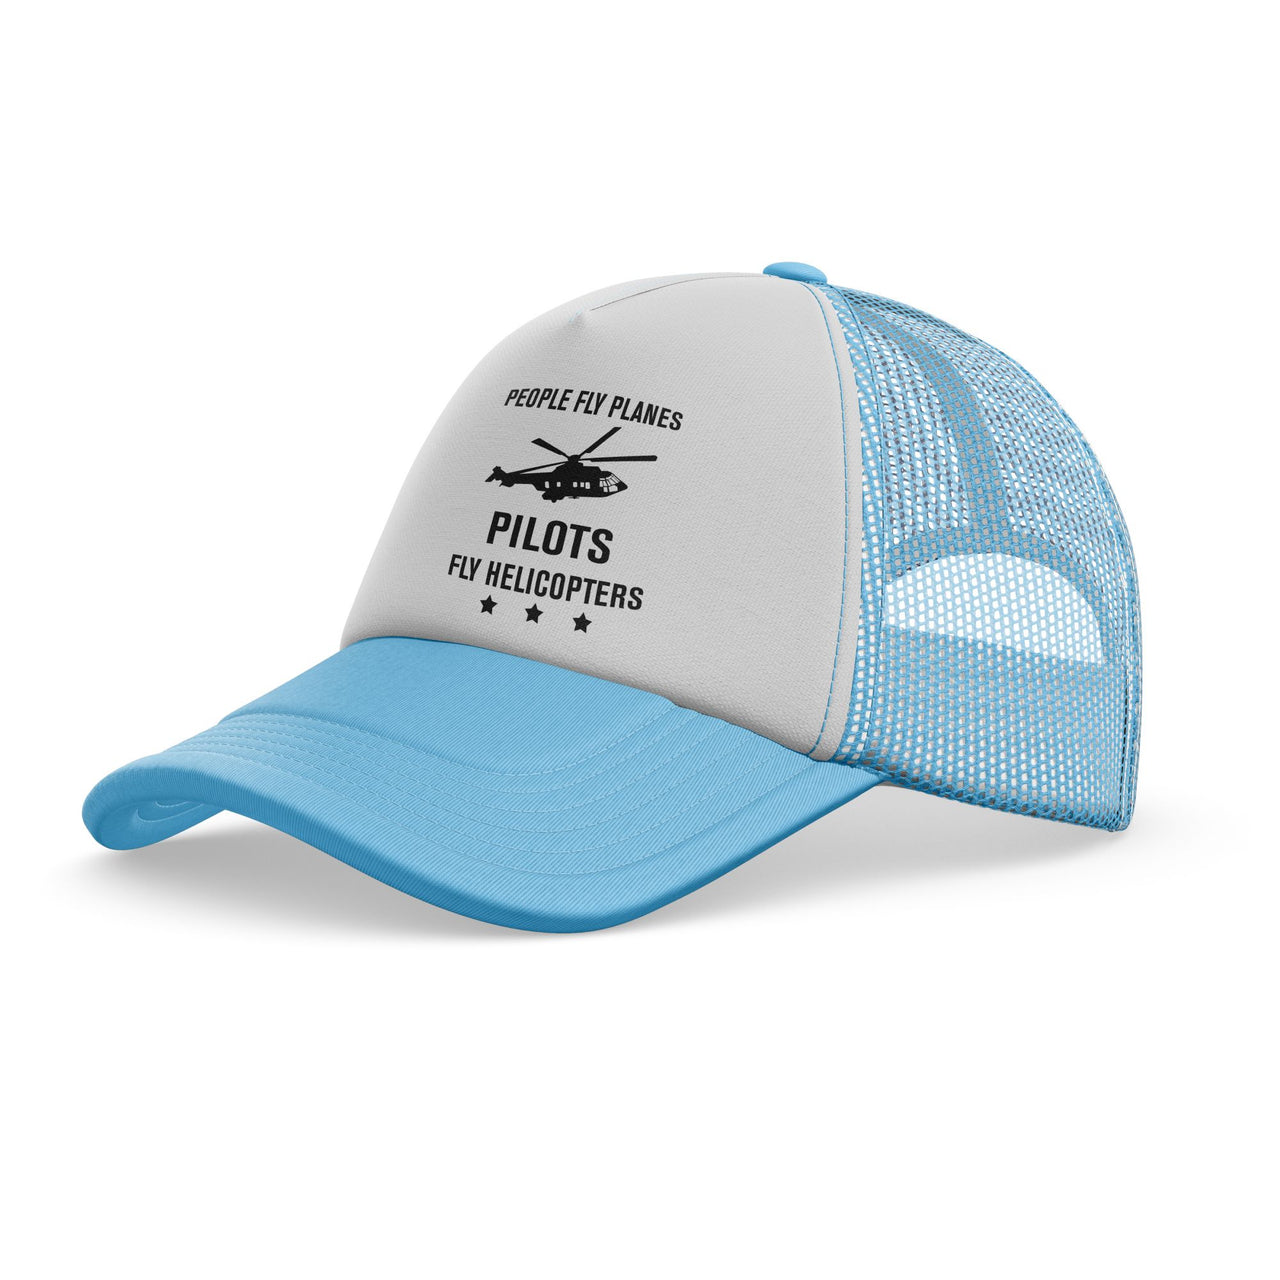 People Fly Planes Pilots Fly Helicopters Designed Trucker Caps & Hats